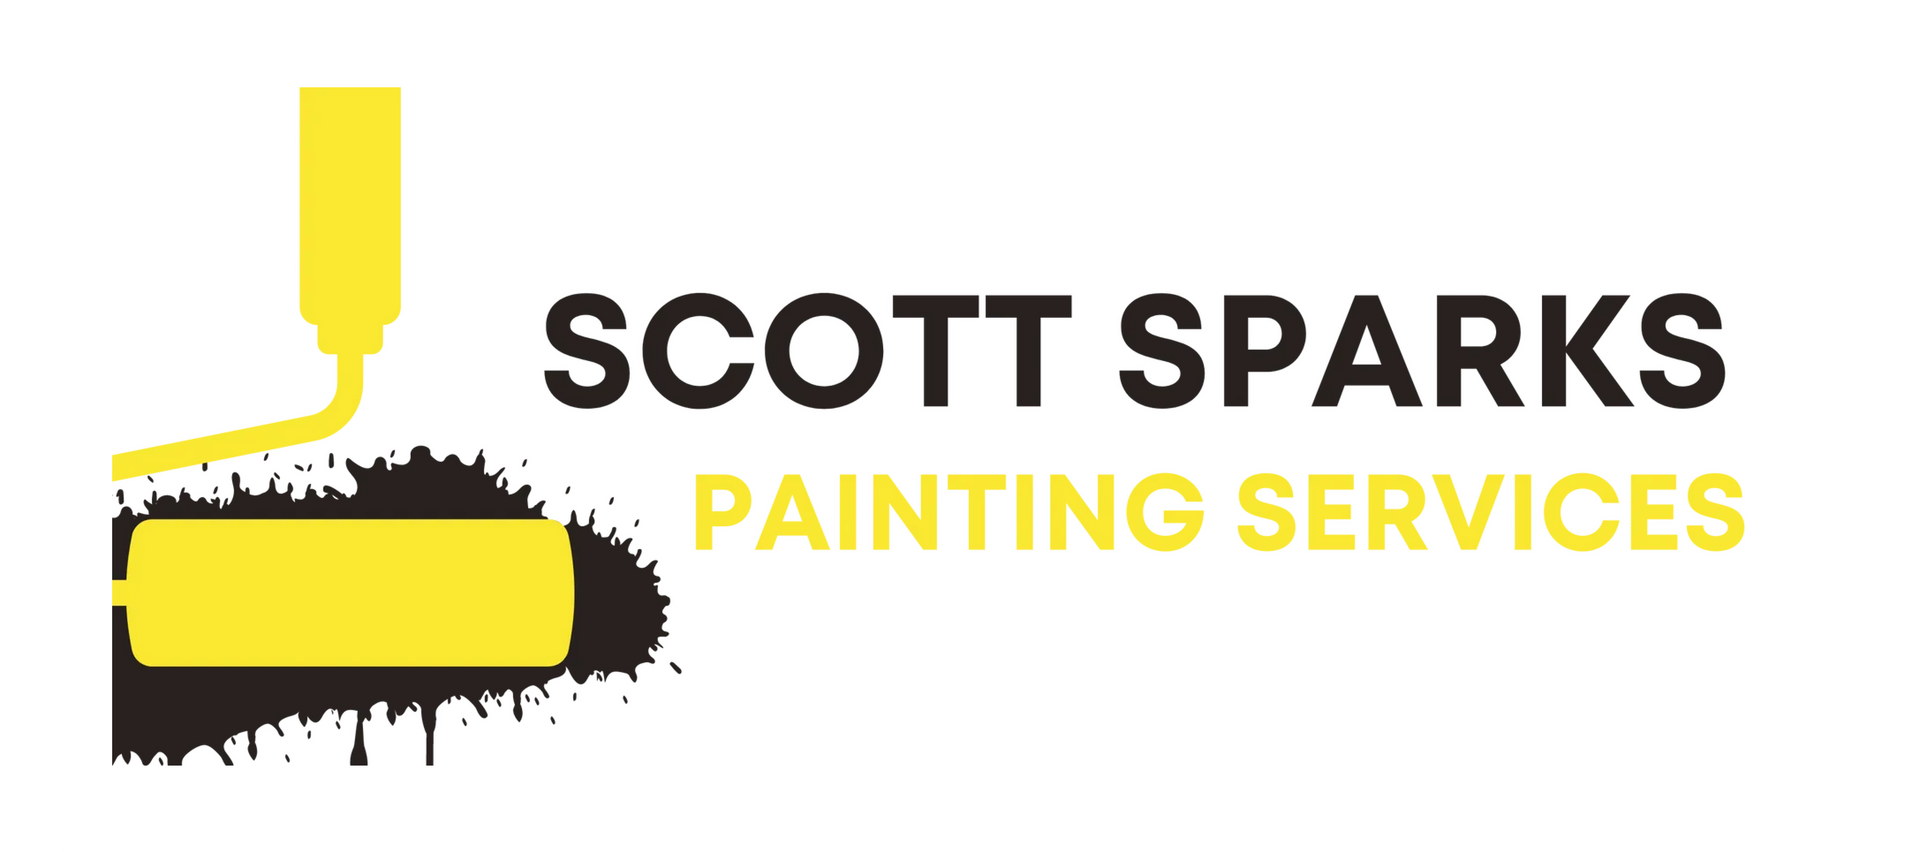 Scott Sparks Painting Services: Experienced Painters on the Fraser Coast